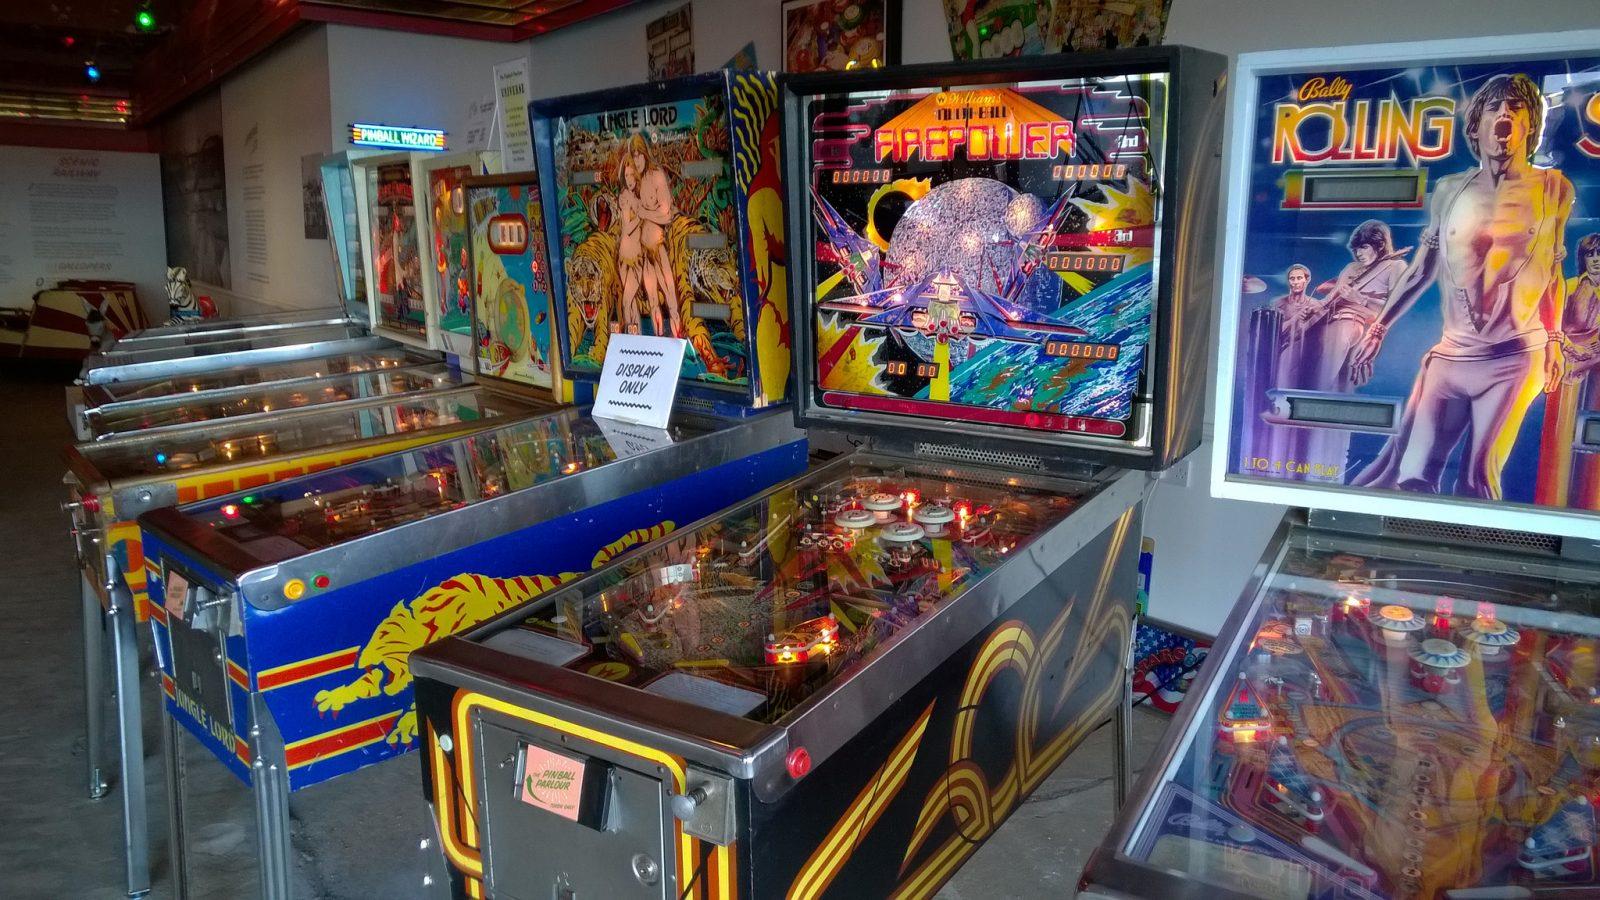 Pinball can be a fun game for all ages, and requires much hand-eye coordination. Photo courtesy of flickr user Sam Millen.